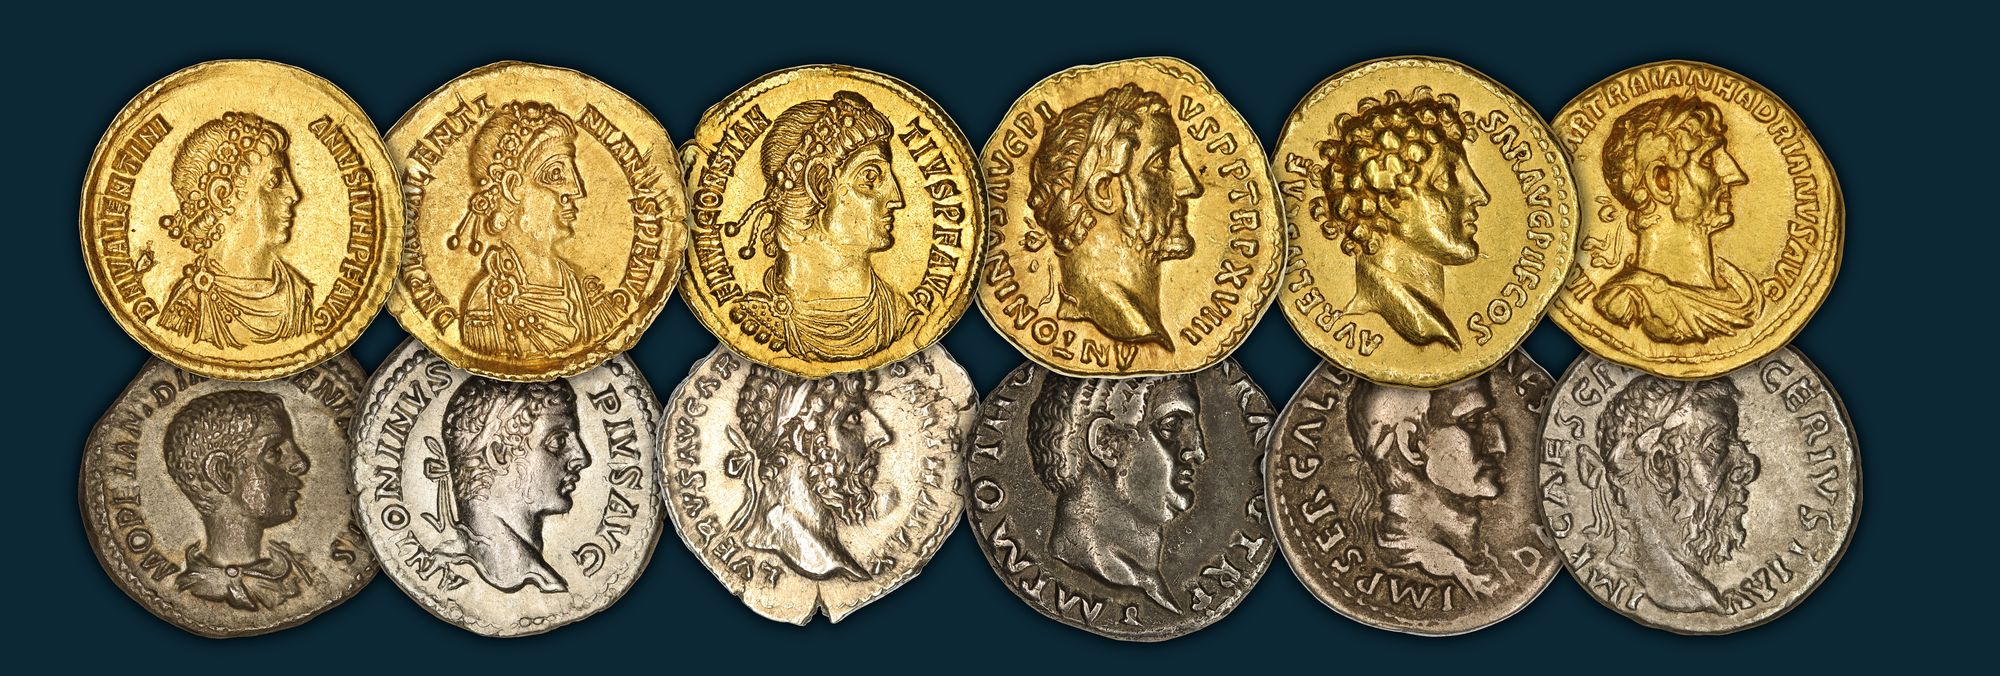 ANCIENT ROMAN COINAGE